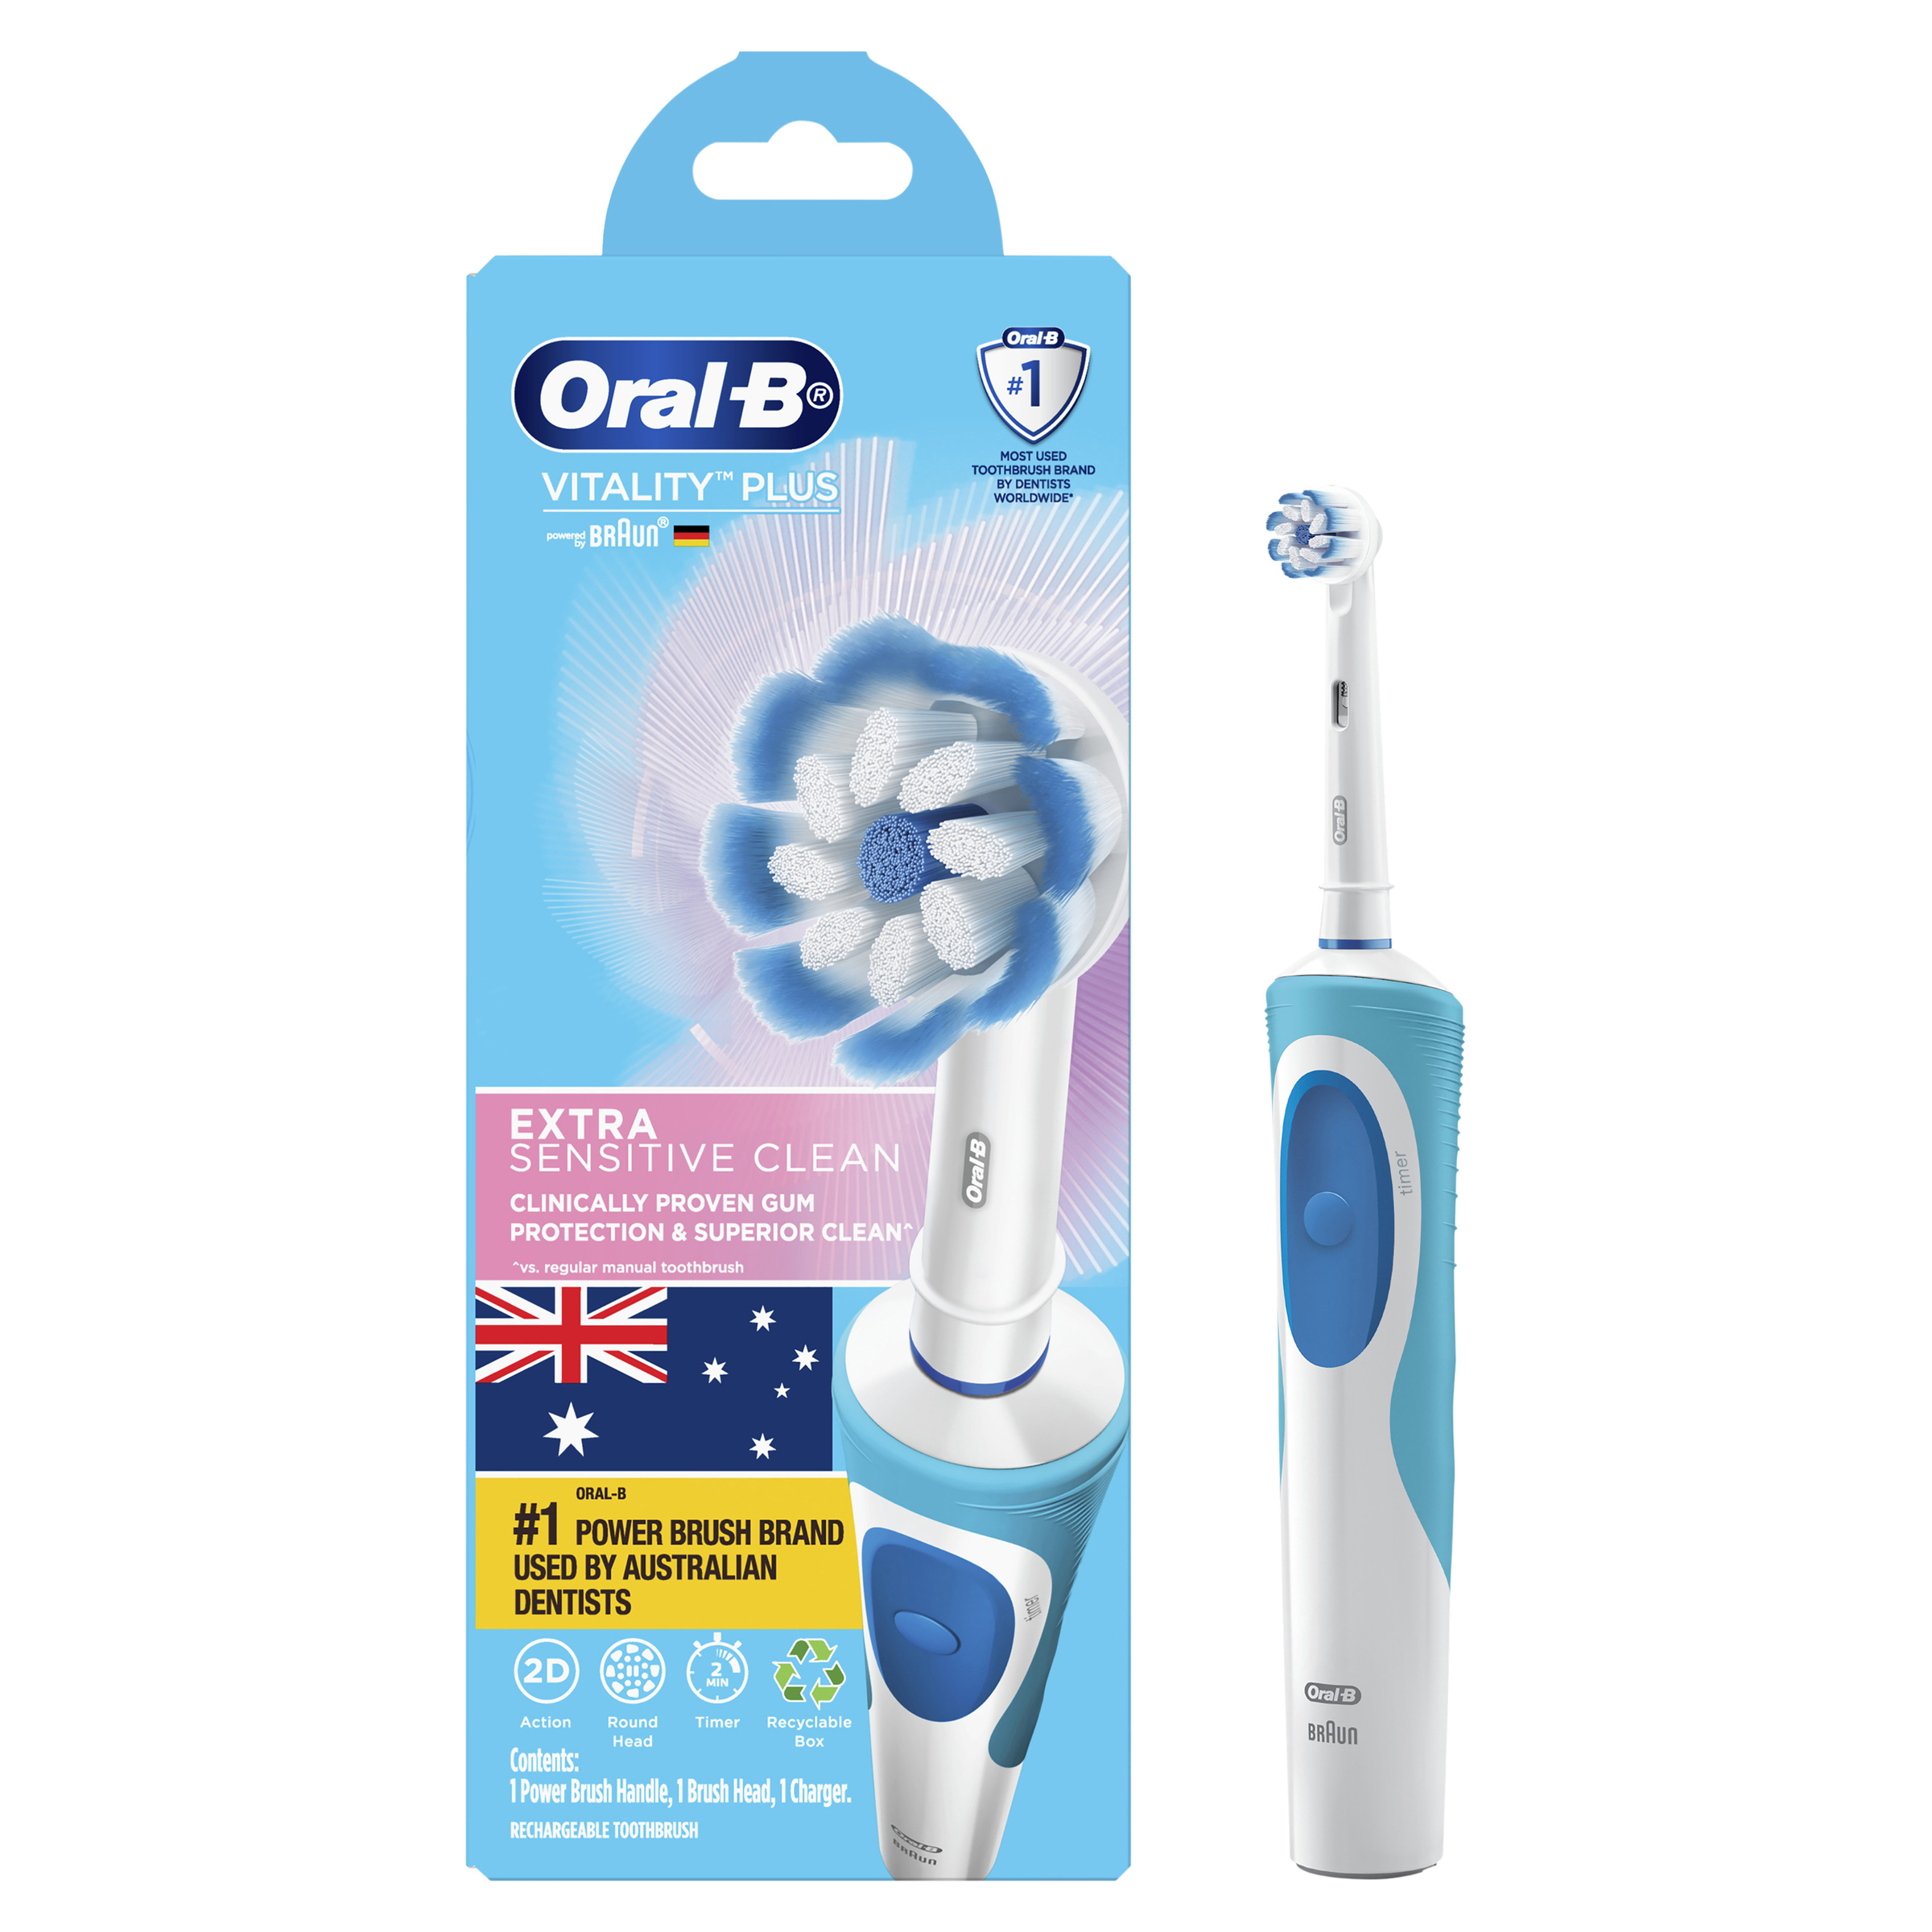 Oral-B Vitality™ Electric Toothbrushes